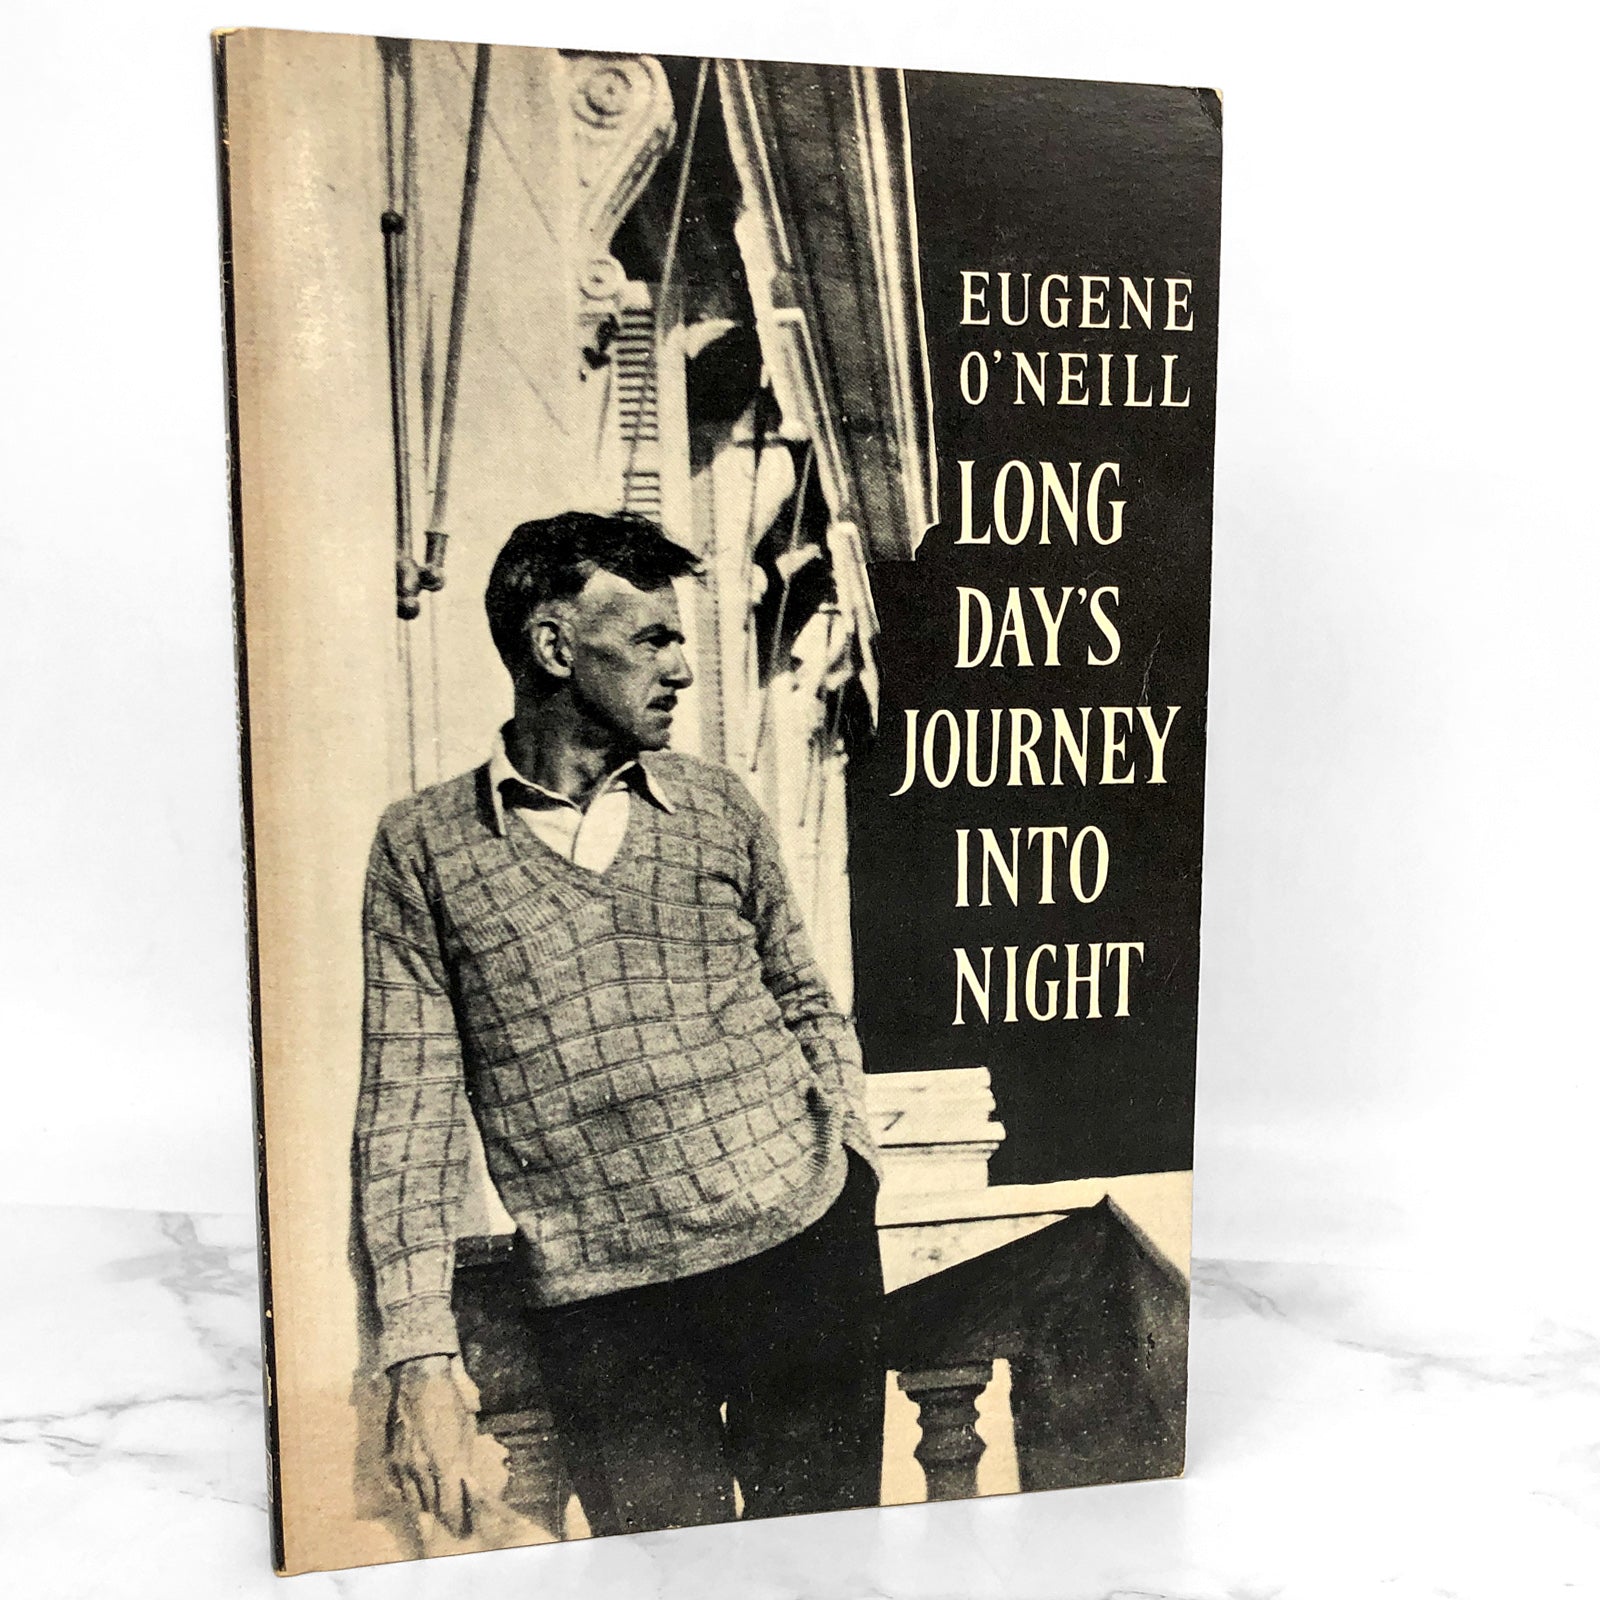 [TRADE　Day's　by　Long　O'Neill　Eugene　Journey　Night　into　PAPE...